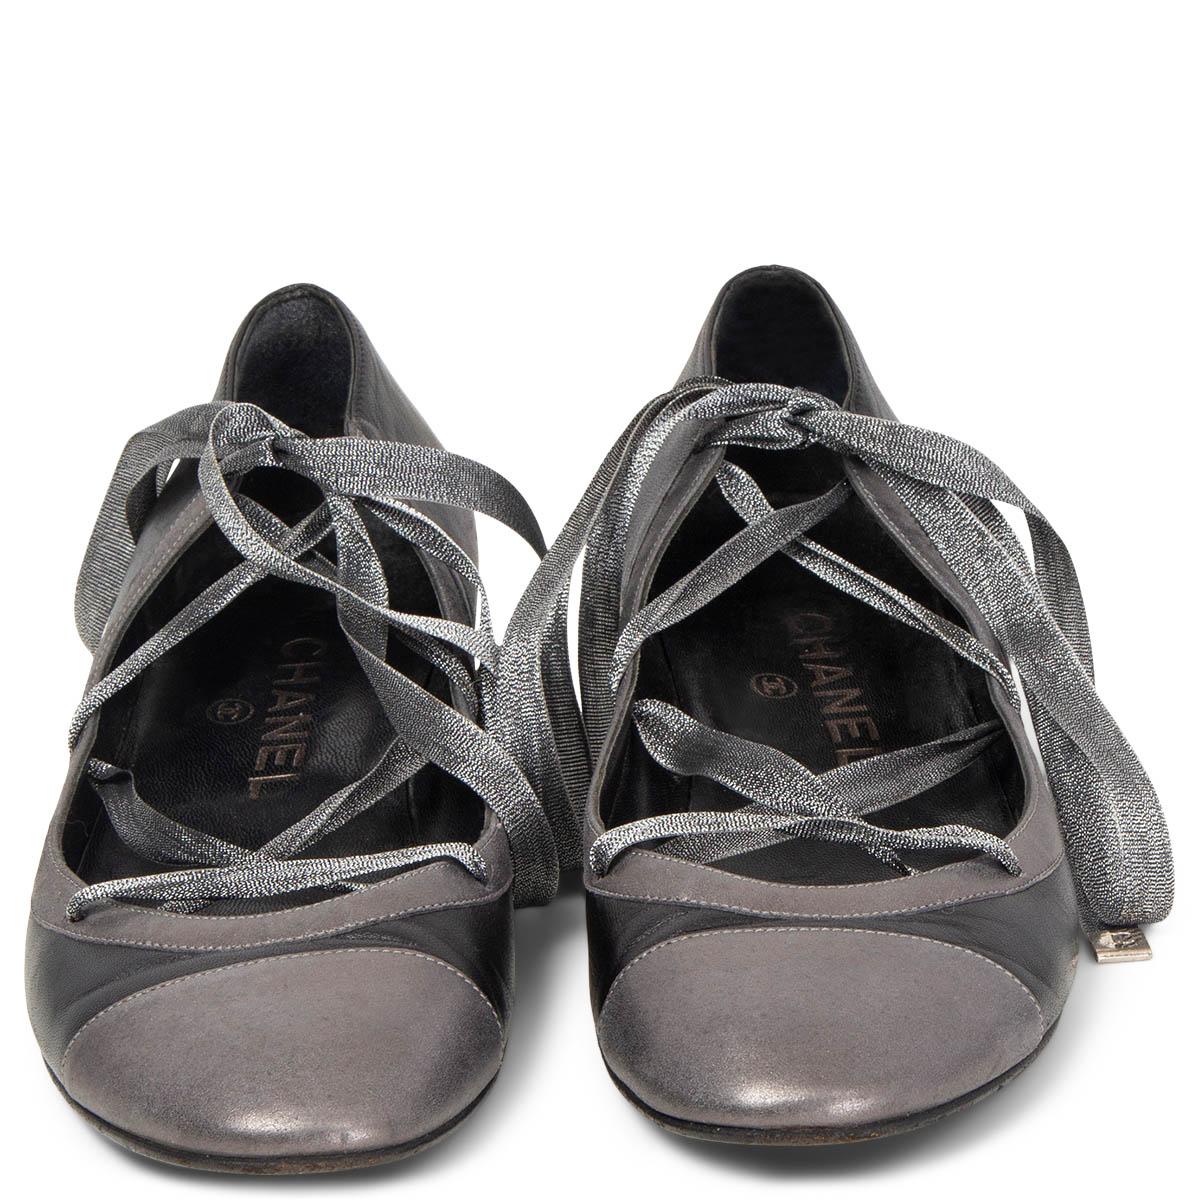 100% authentic Chanel mini kitten heel ballet flats in black and metallic grey leather with silver lurex ankle-strap lace detail. Have been worn and show wear to the soles. Overall in very good condition. Come with dust bags.